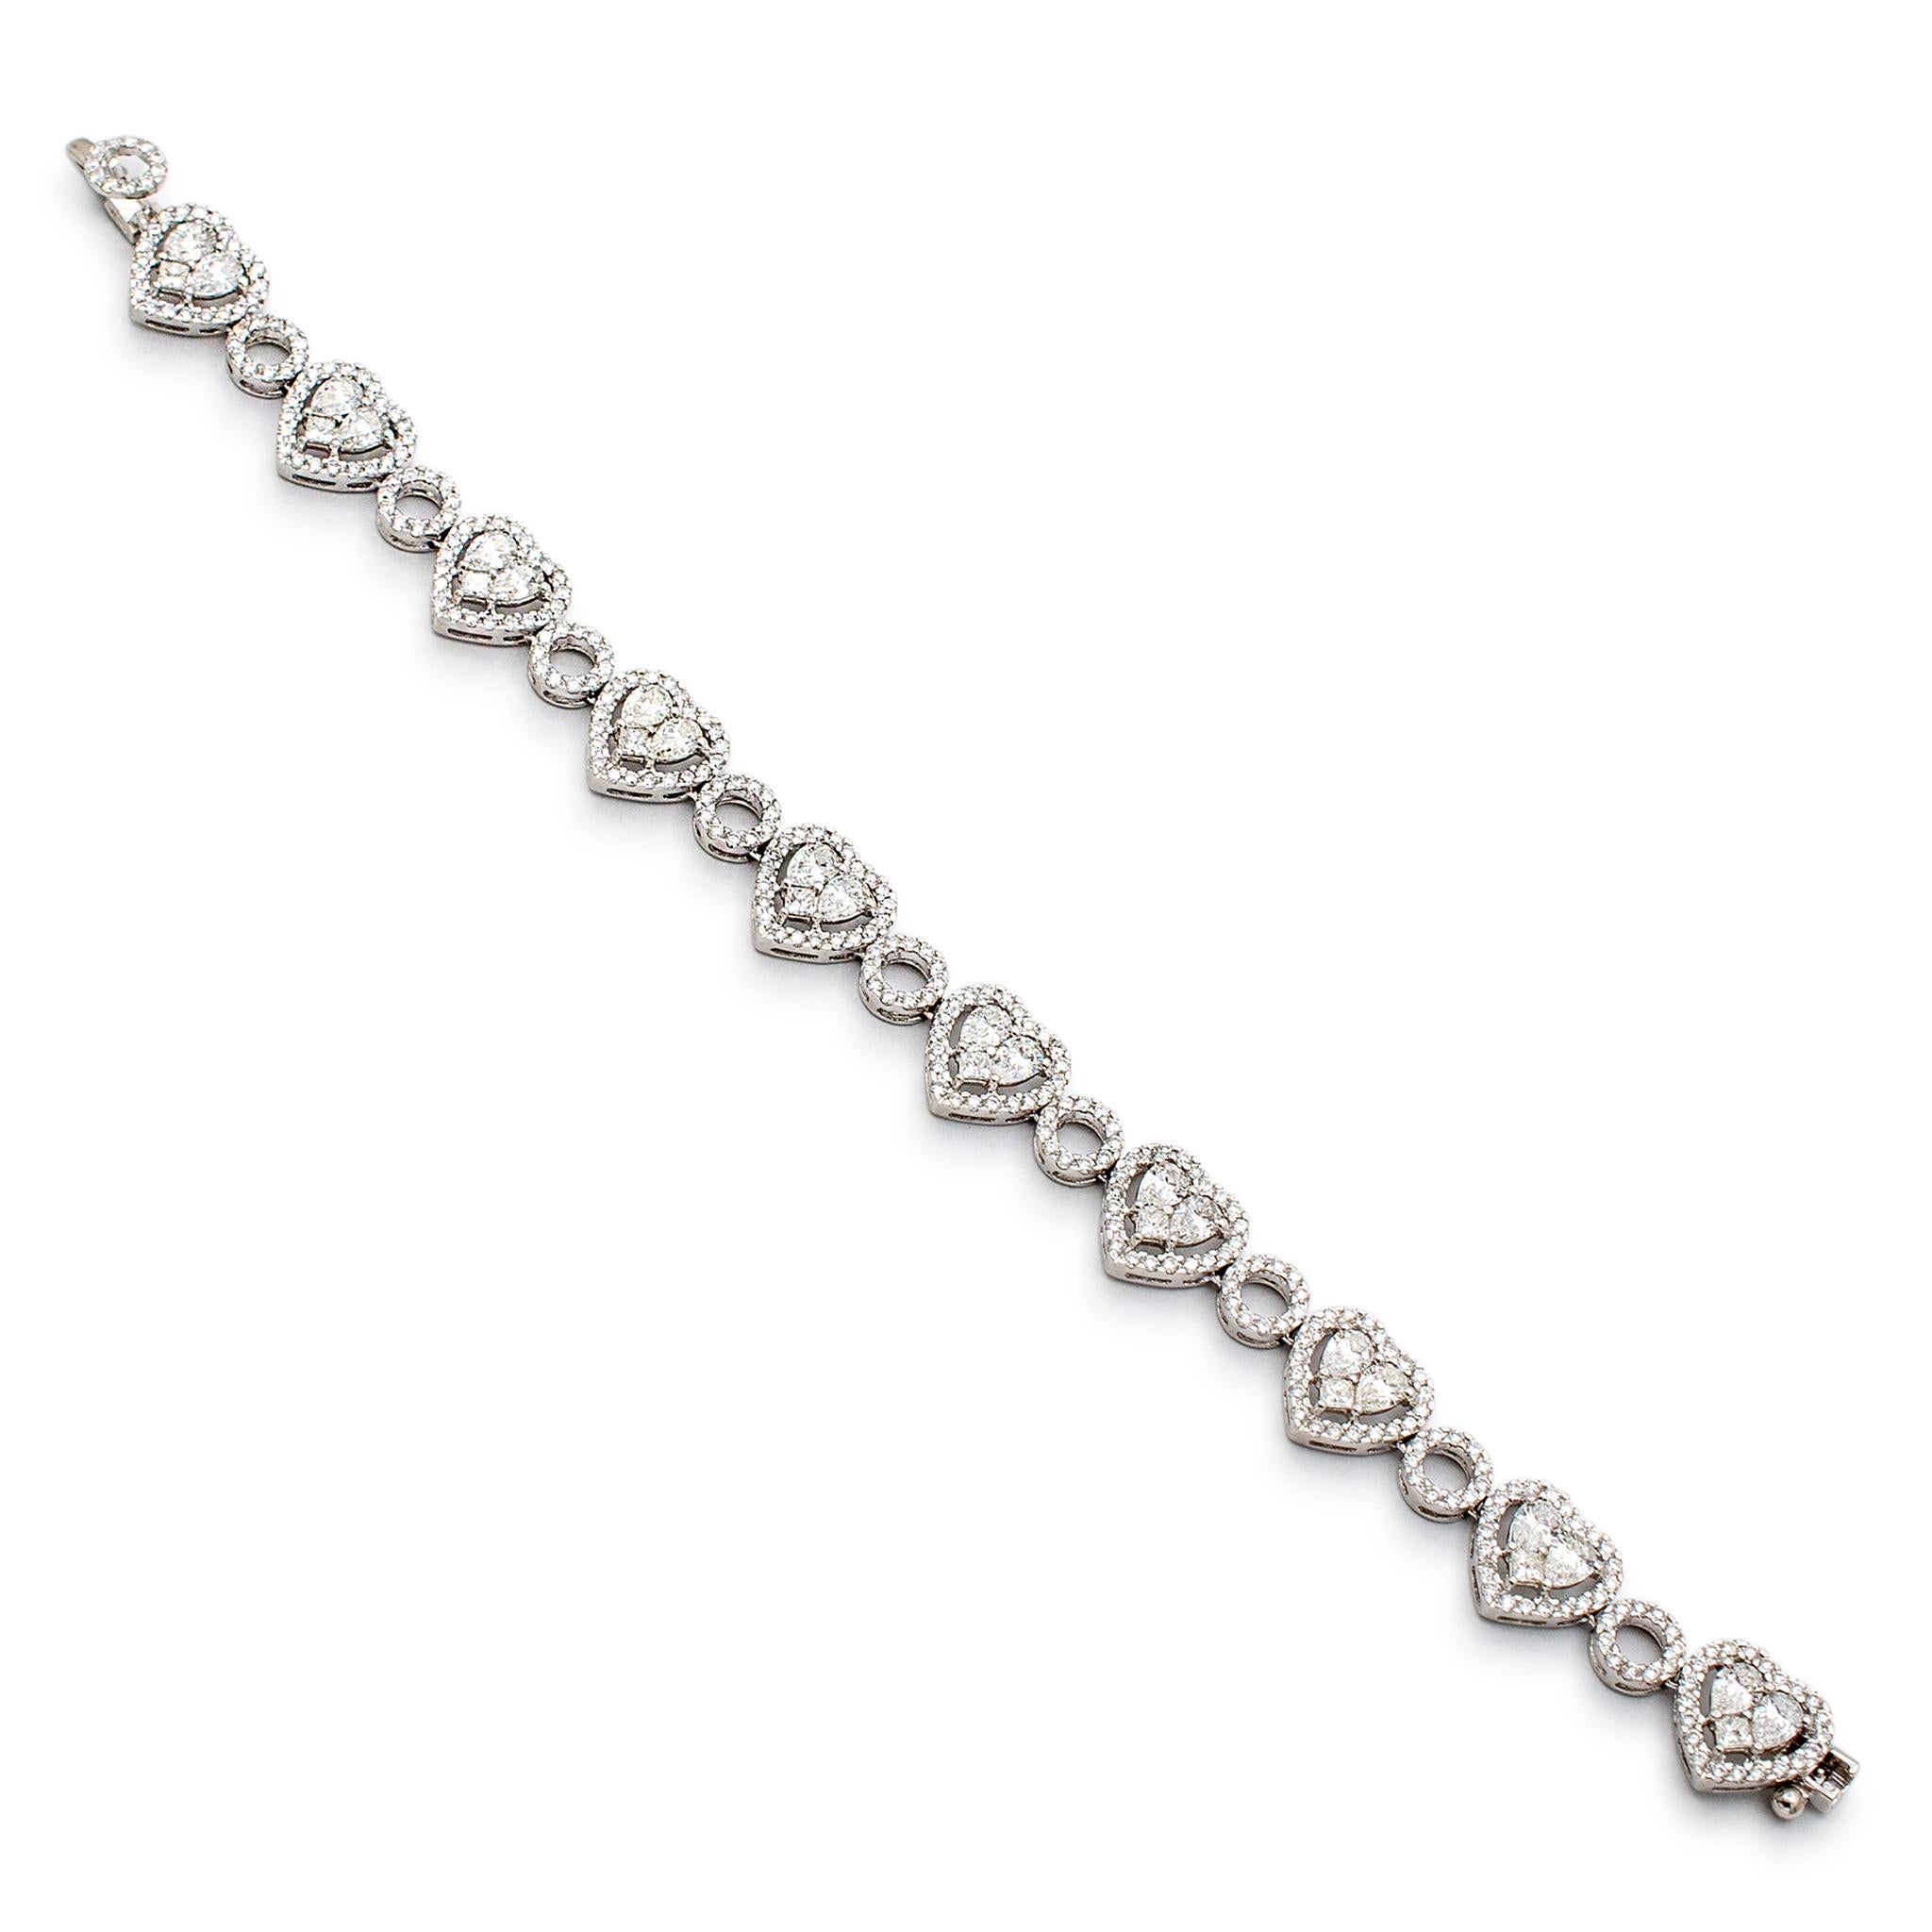 Gender: Ladies

Metal Type: 18K White Gold

Length: 6.5 Inches

Width: 11.00 mm

Weight: 18.07 grams

Ladies 18K white gold diamond link tennis bracelet. Engraved with 